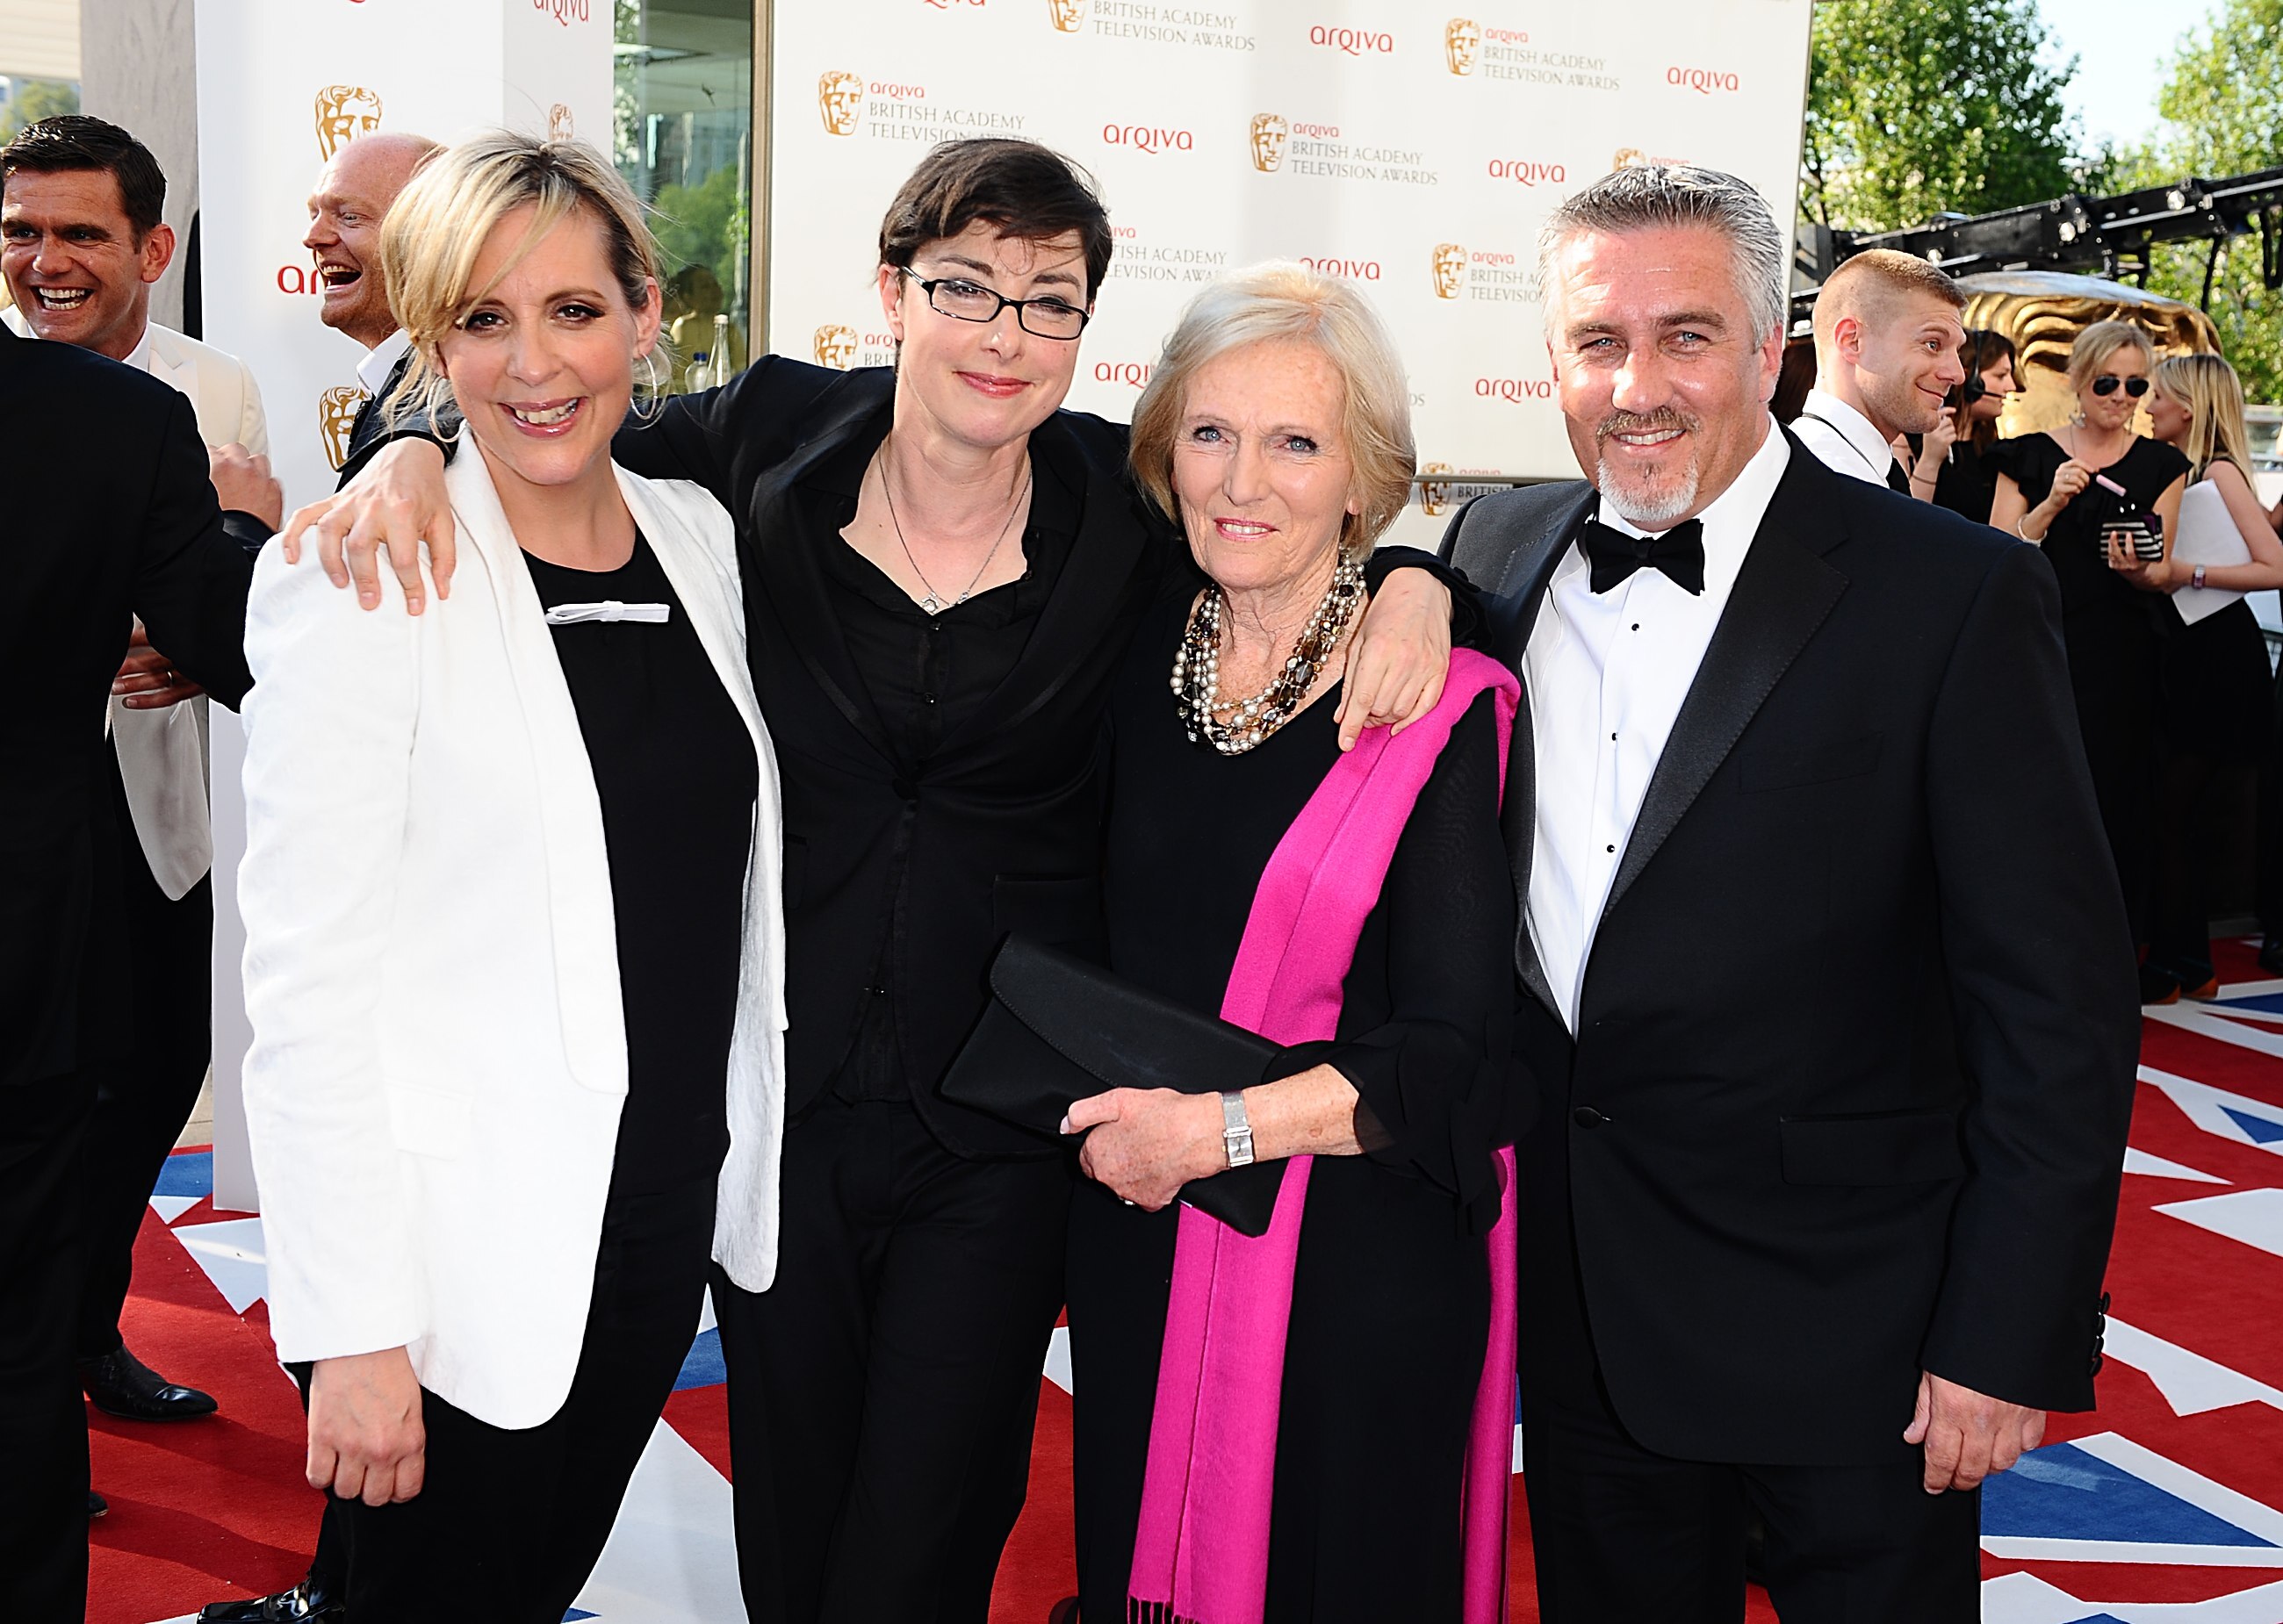 Sue Perkins with Bake Off co-stars Mel Giedroyc, Mary Berry and Paul Hollywood in 2012 